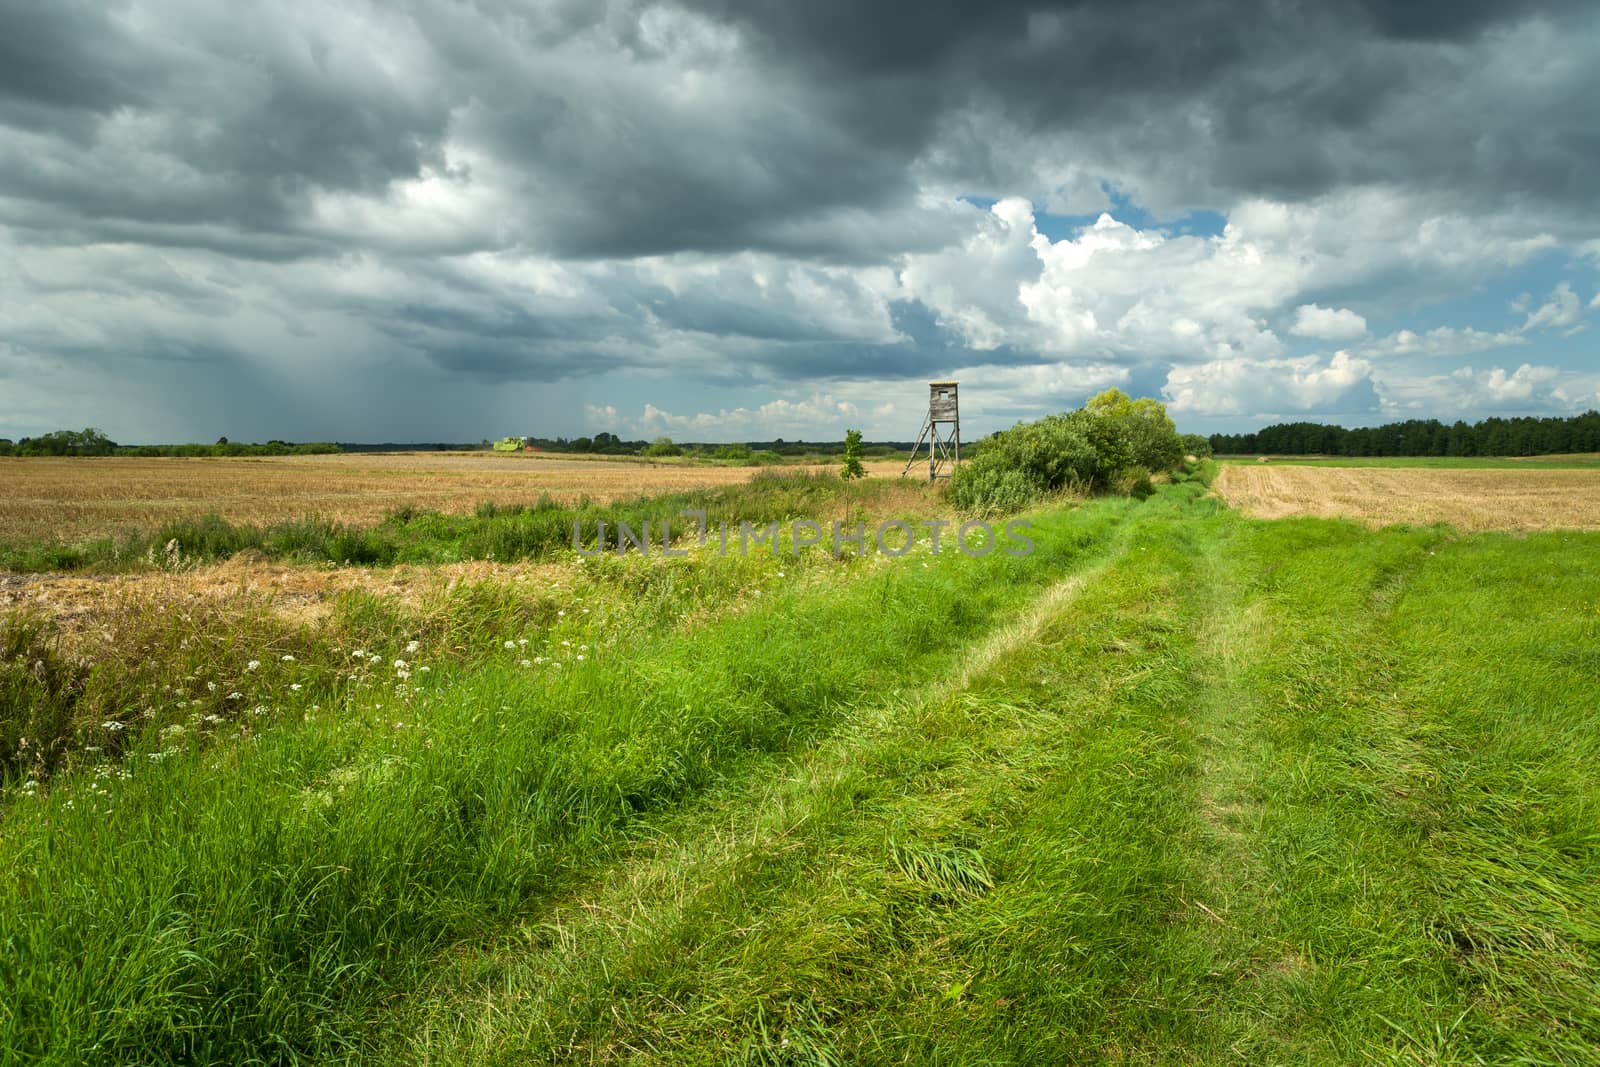 Grassy road to the field and rain cloud, summer view in eastern Poland